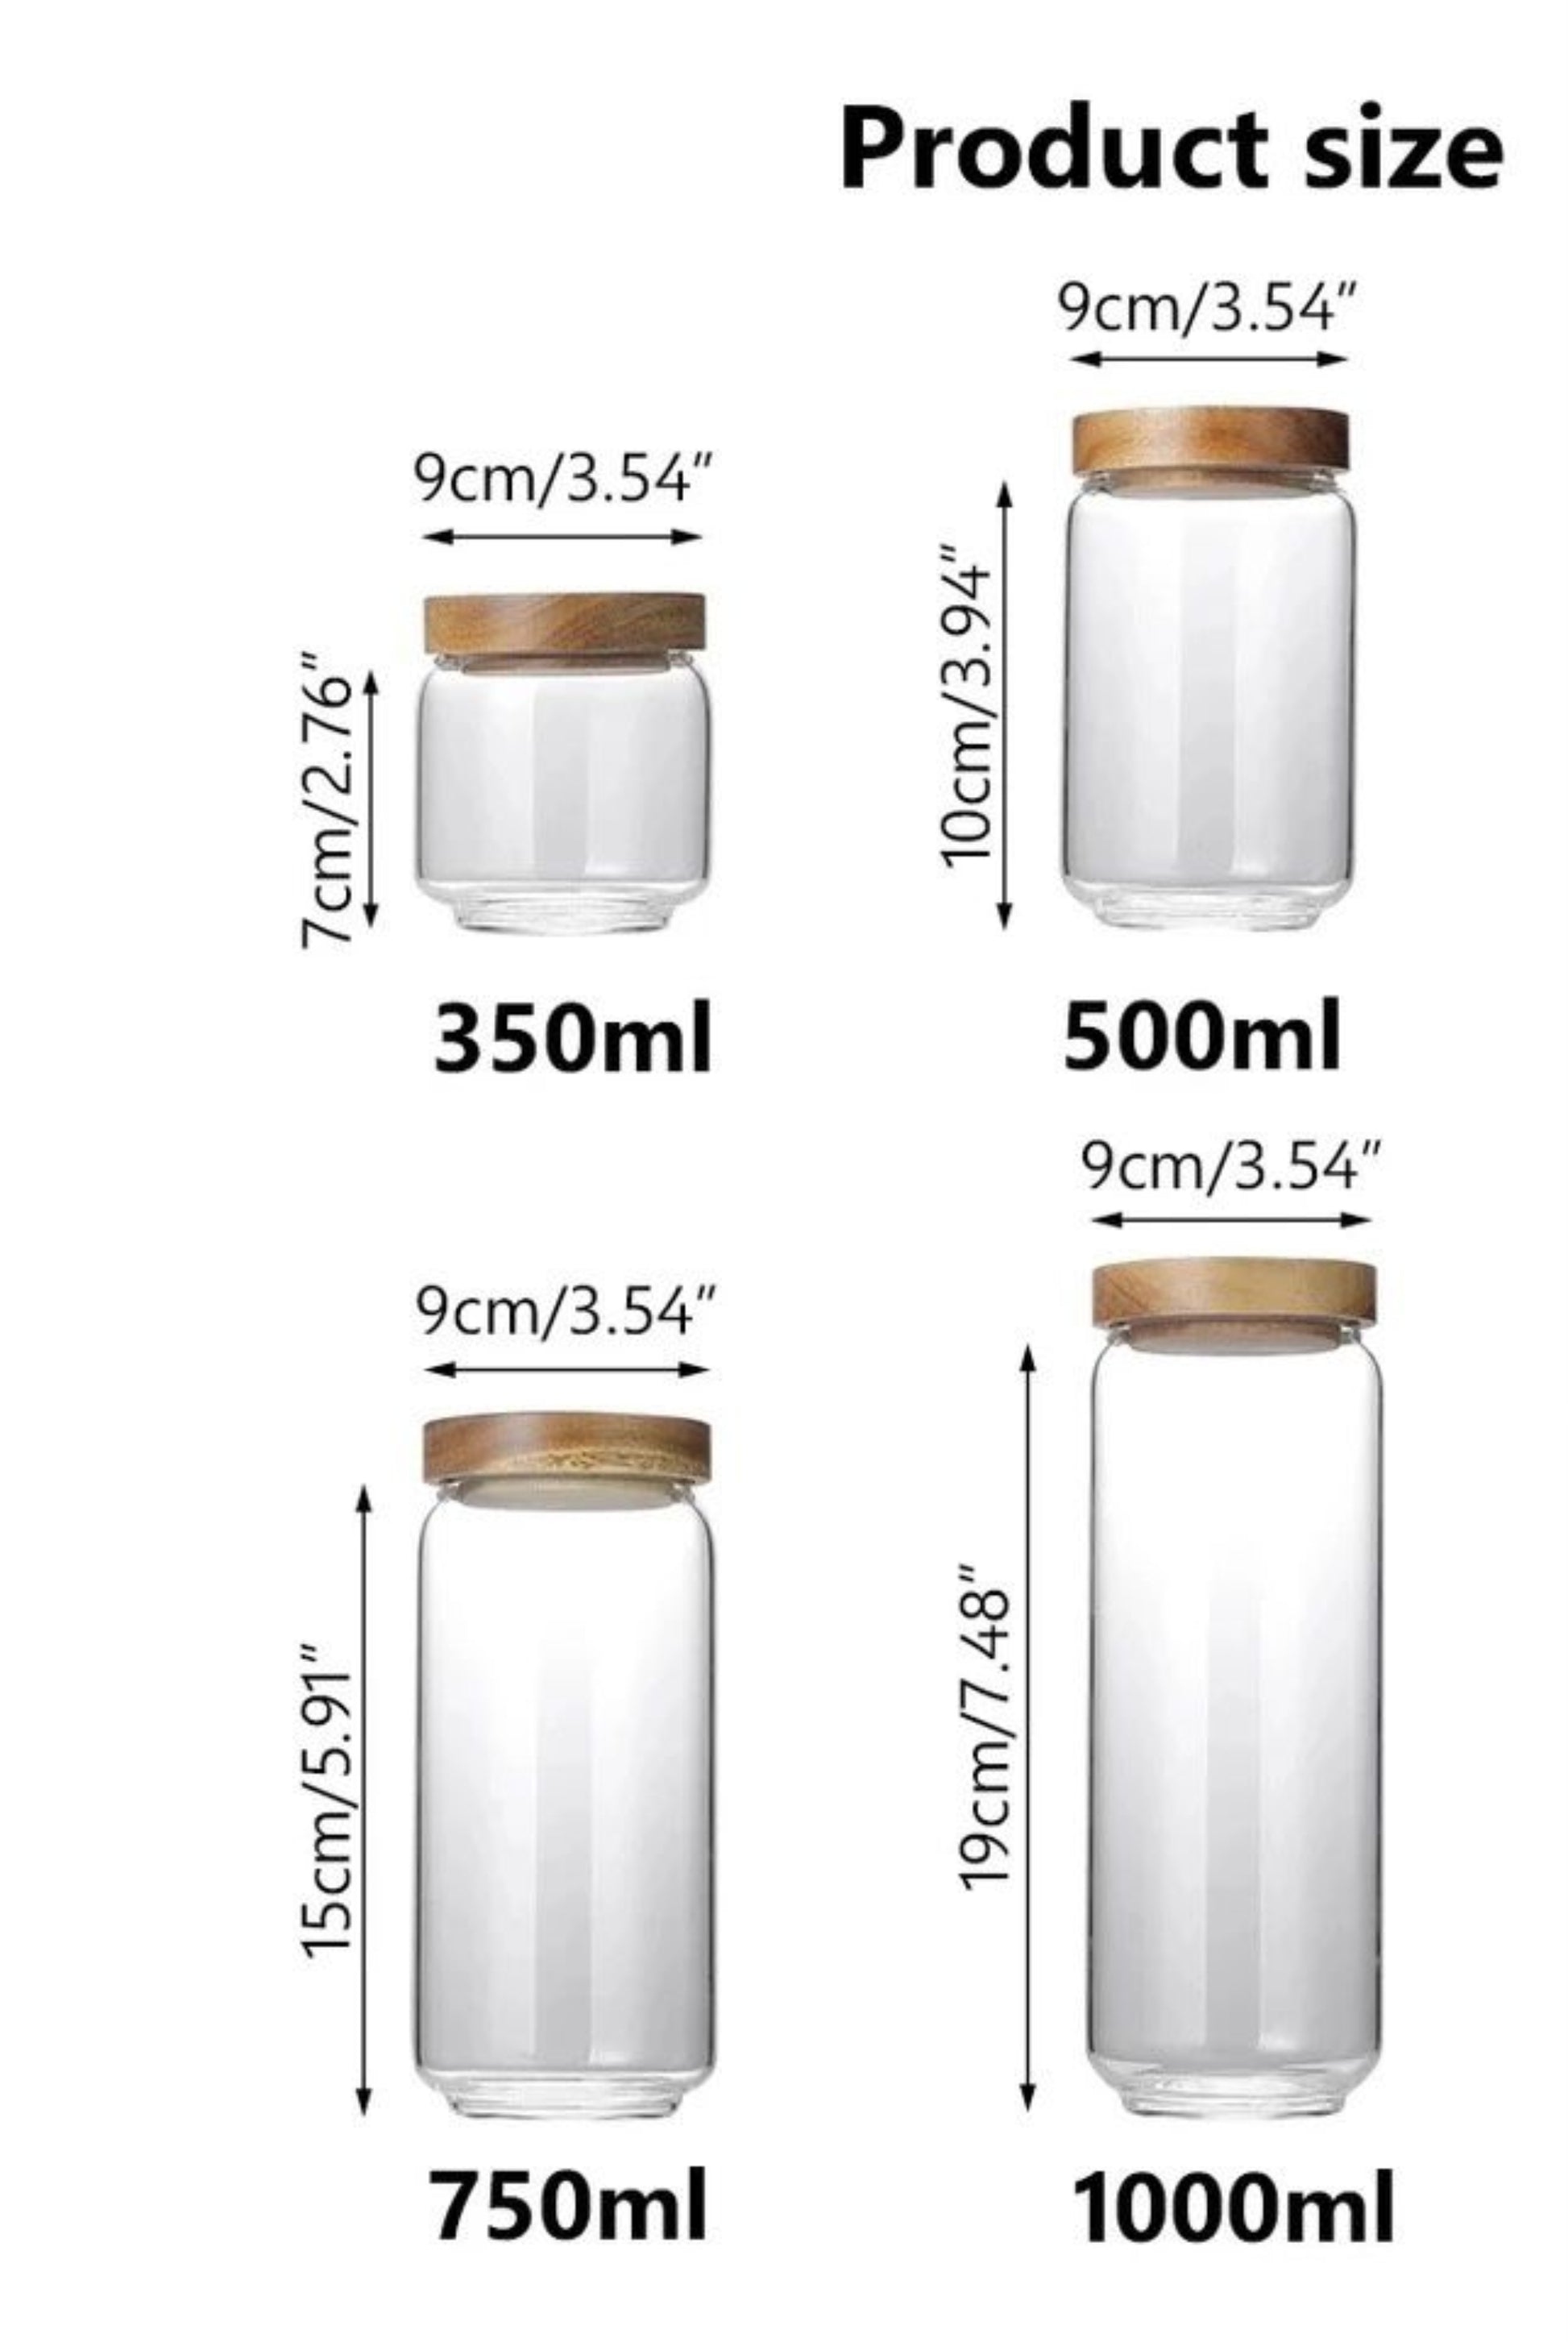 Showing the dimensions of rach glass jars. There are three sizes, 350ml, 500ml, 750ml and 1000ml